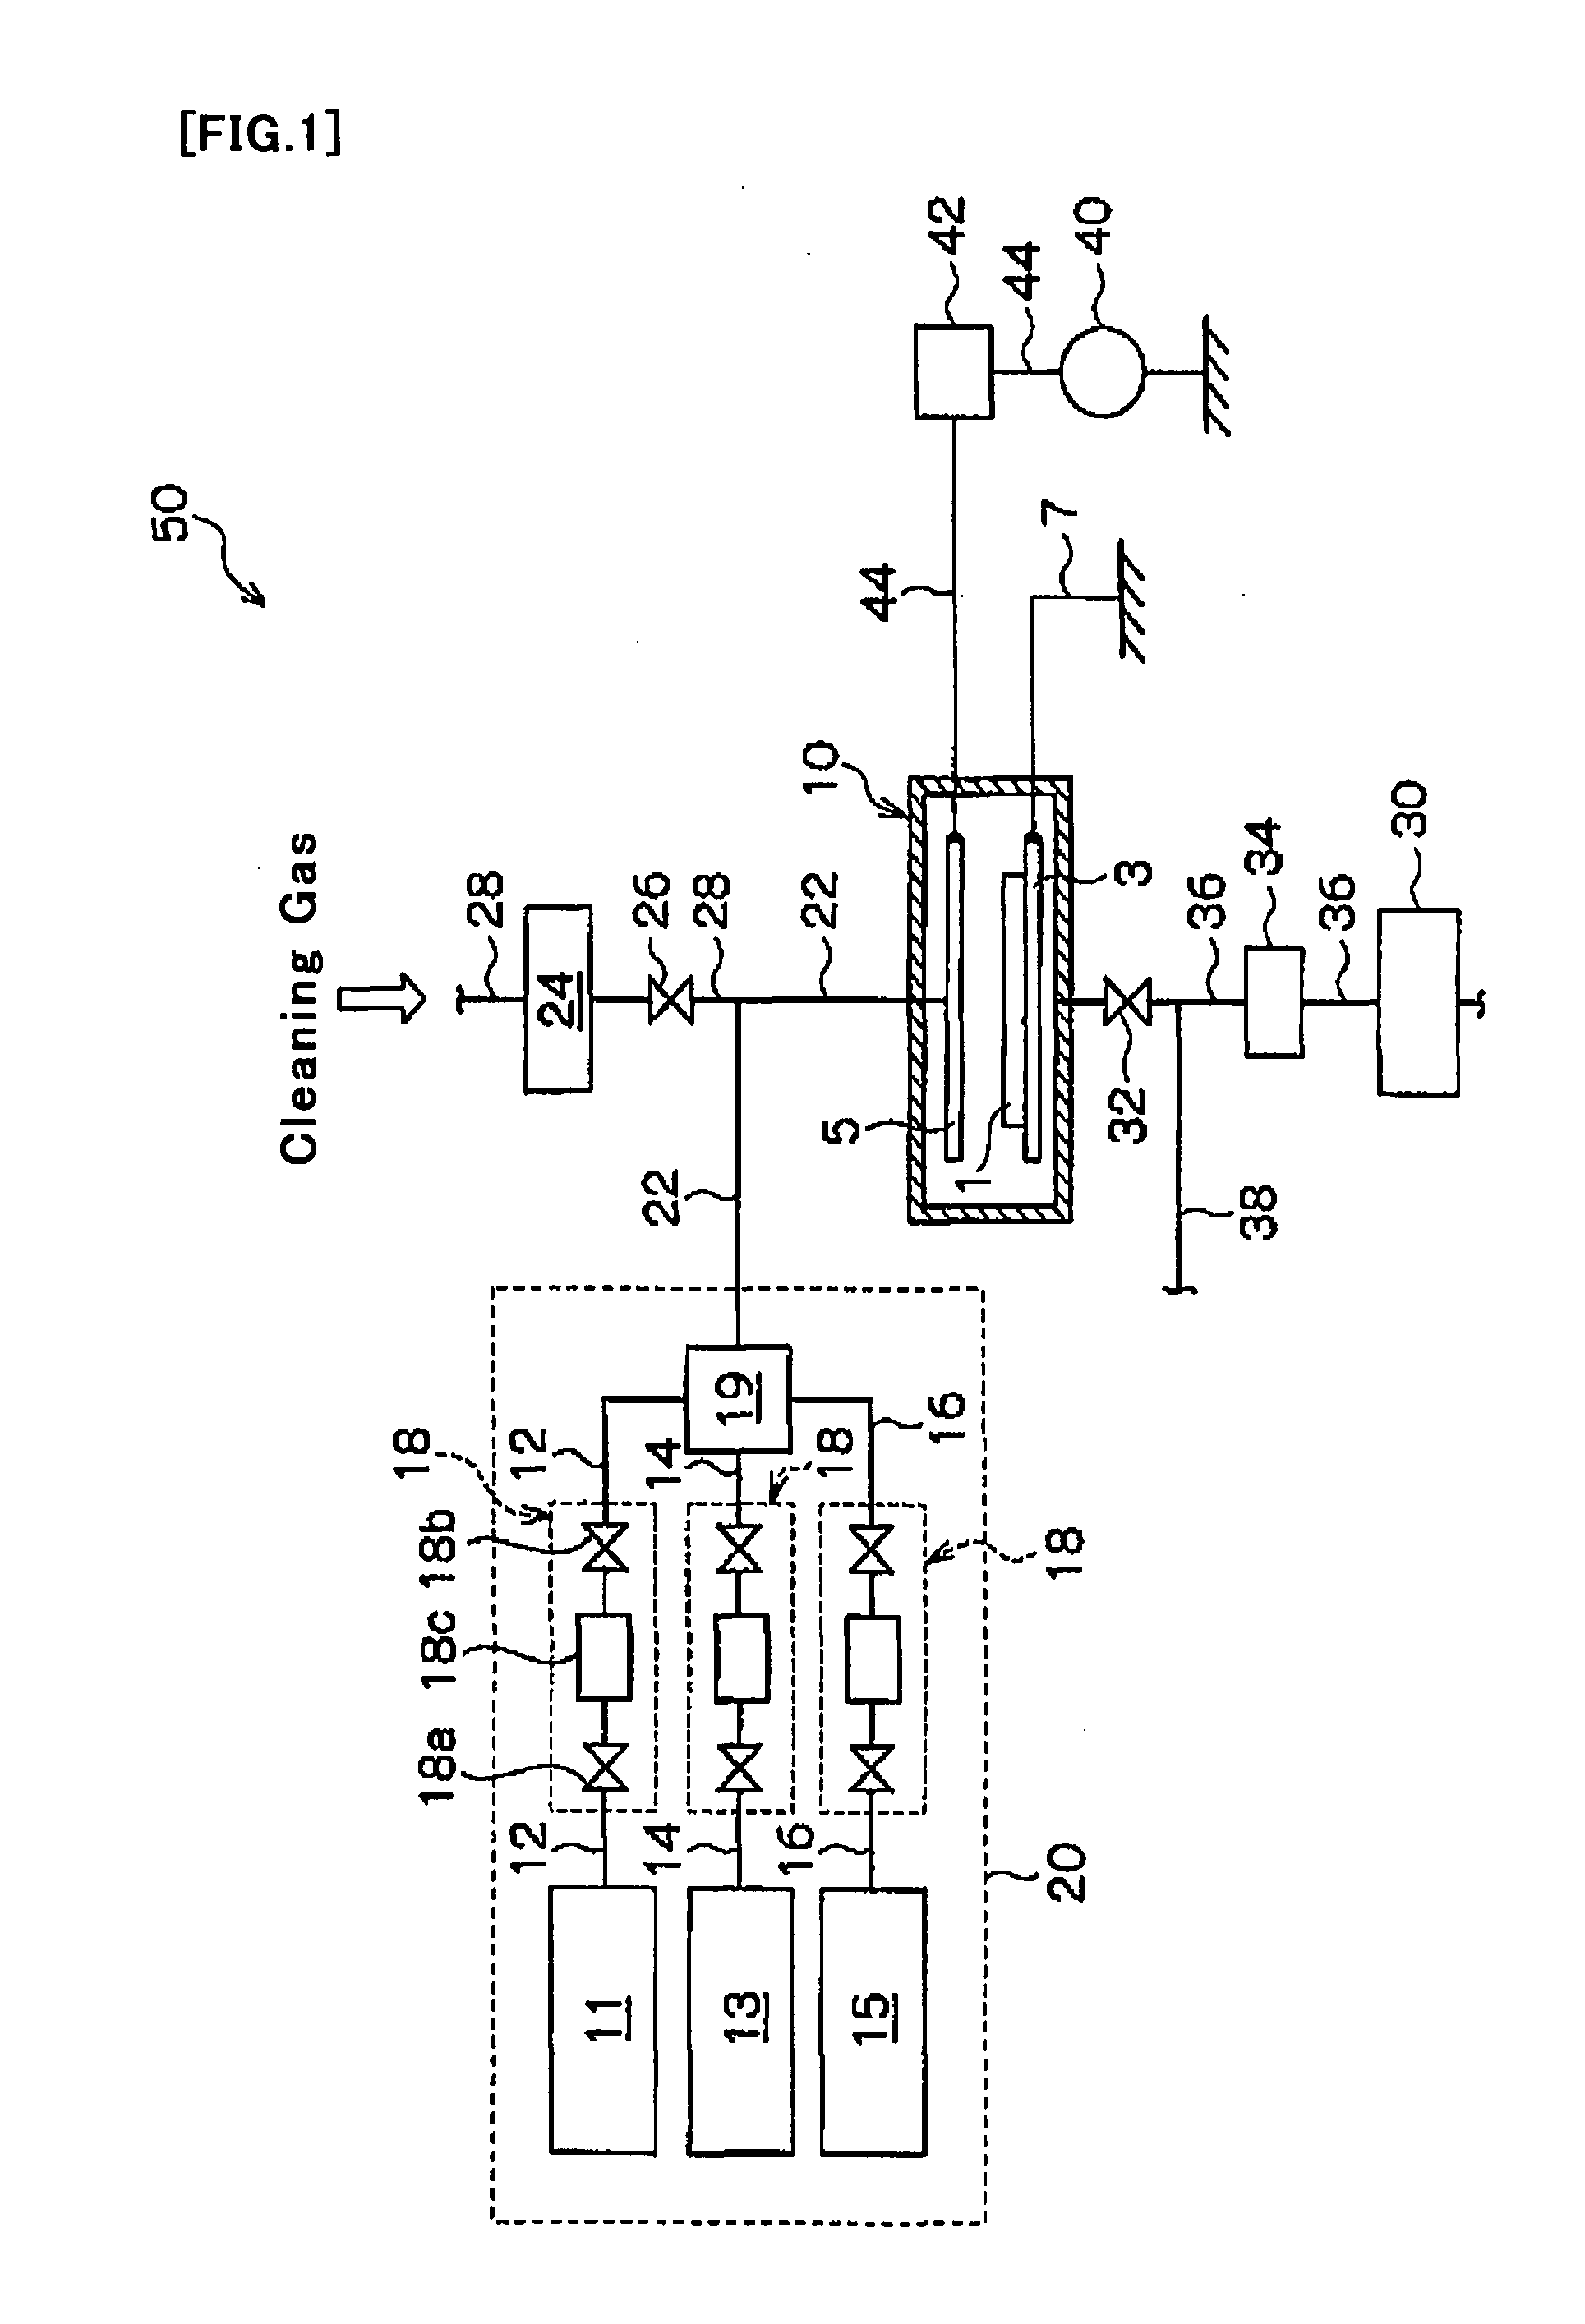 Method of Fabricating Organic Silicon Film, Semiconductor Device Including the Same, and Method of Fabricating the Semiconductor Device